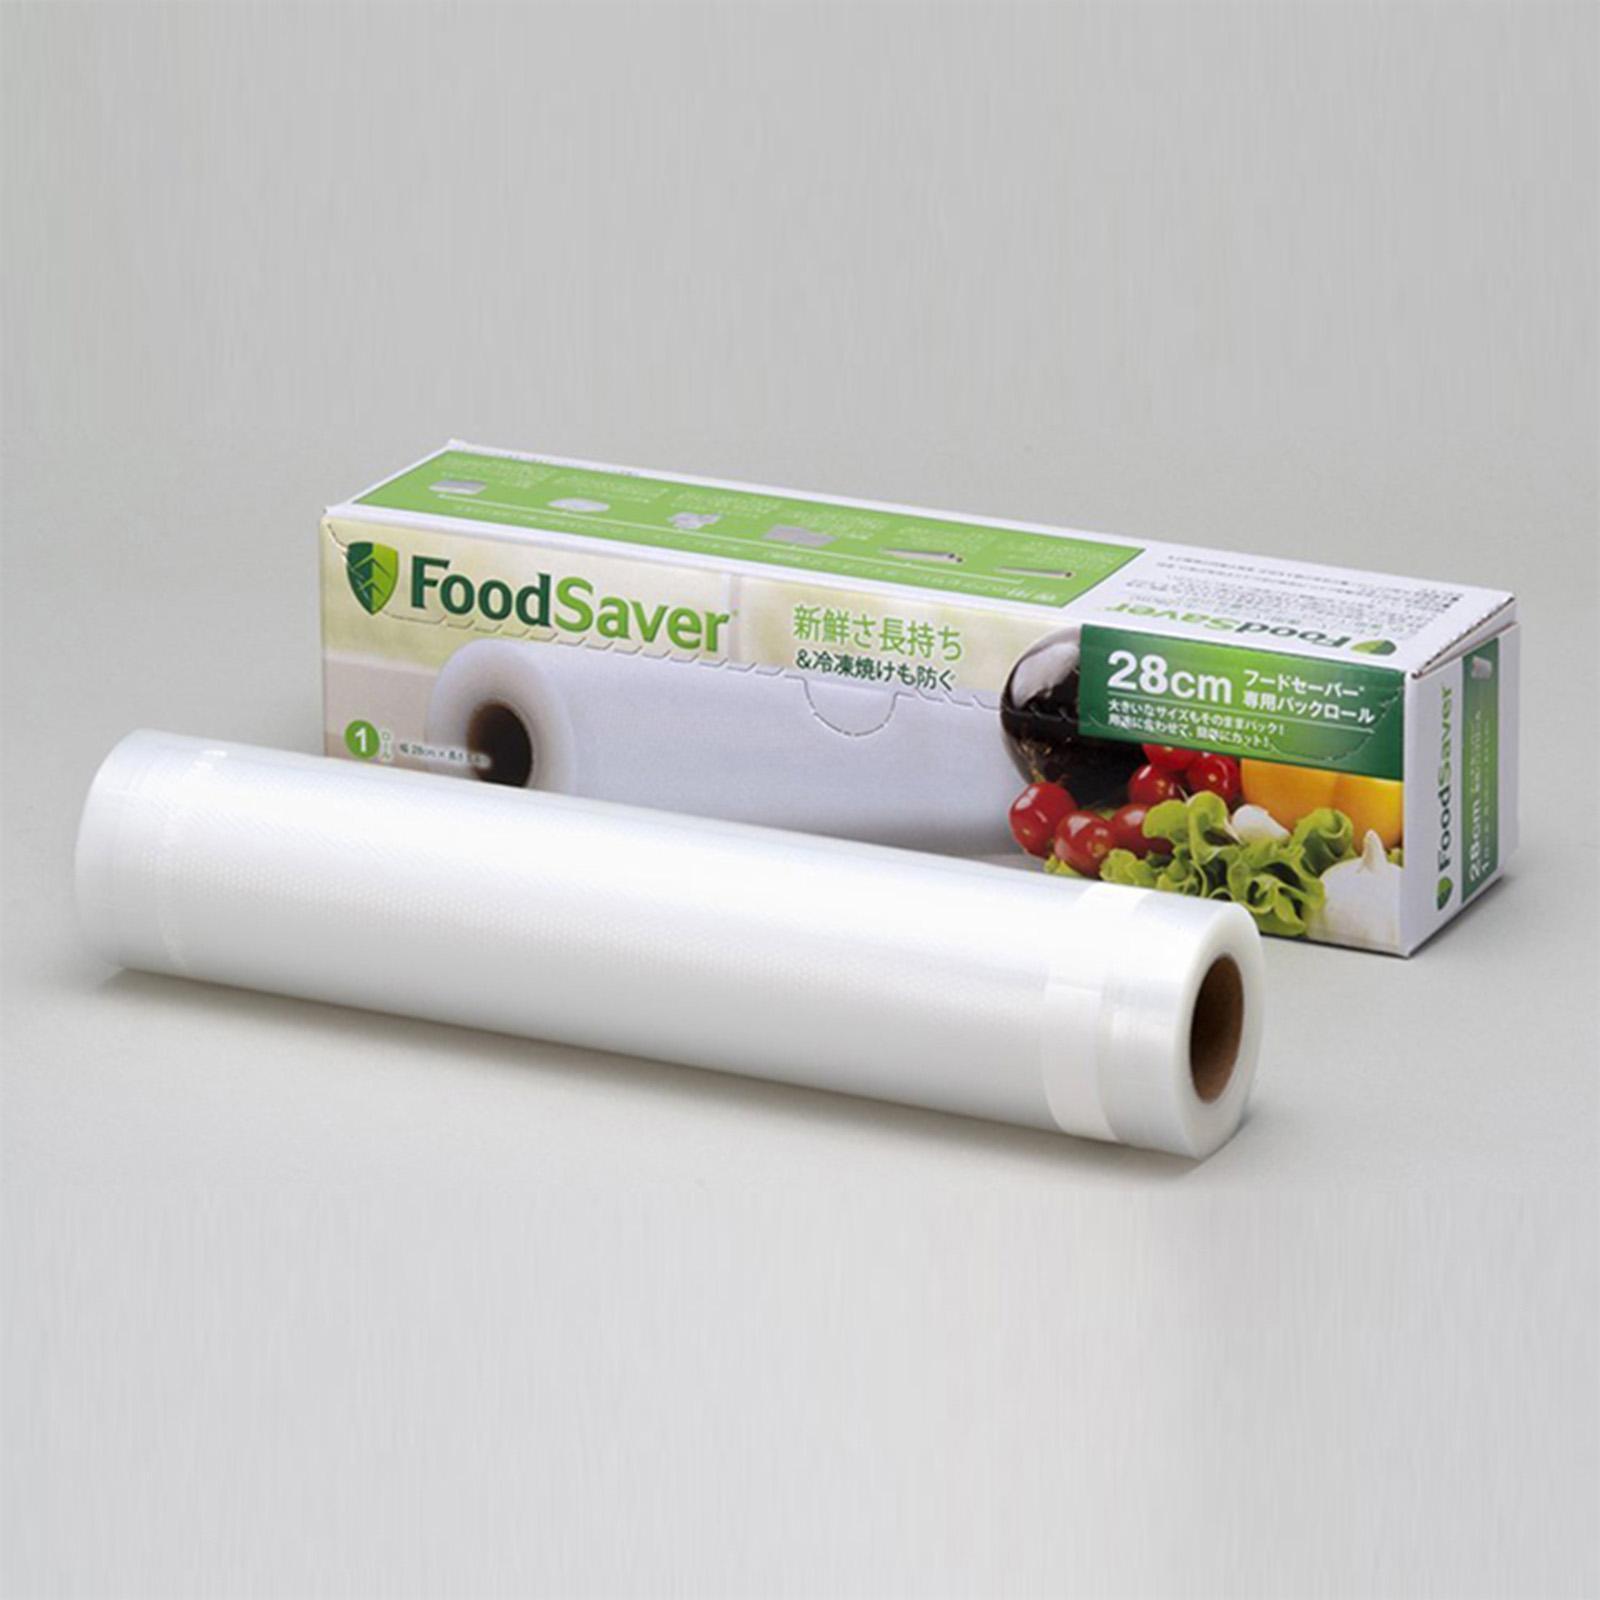 FoodSaver 2-Roll Pack Expandable Pleated Heat-Seal Rolls